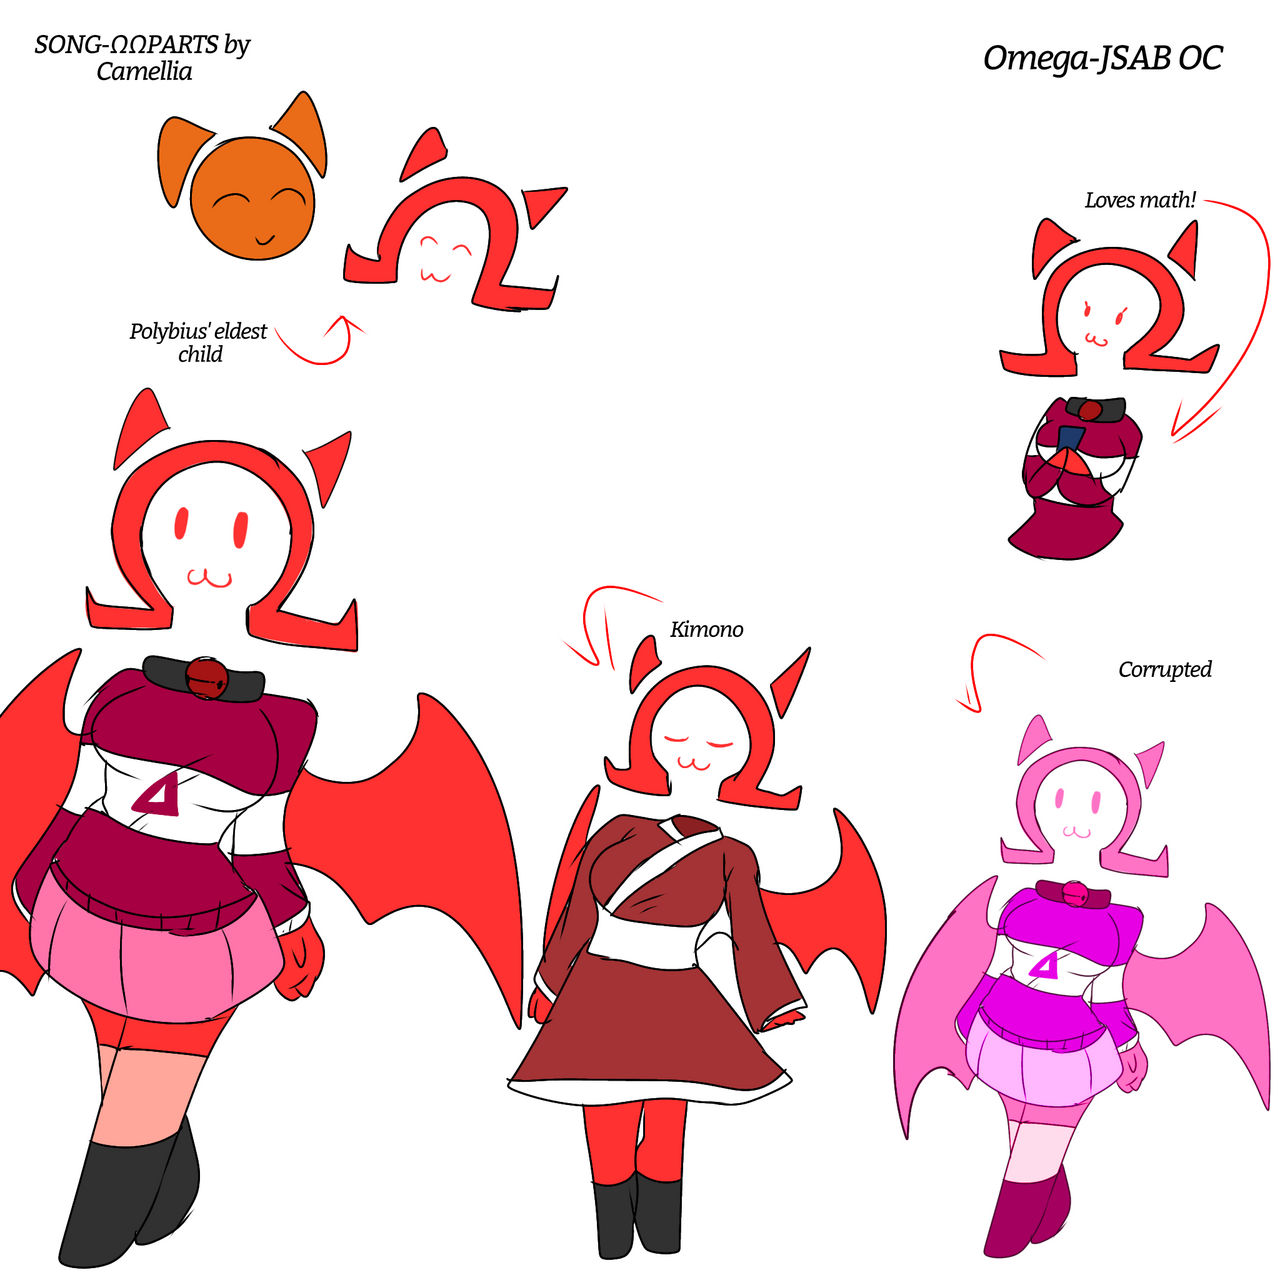 Just shapes and beats by OolongTeaplus on DeviantArt